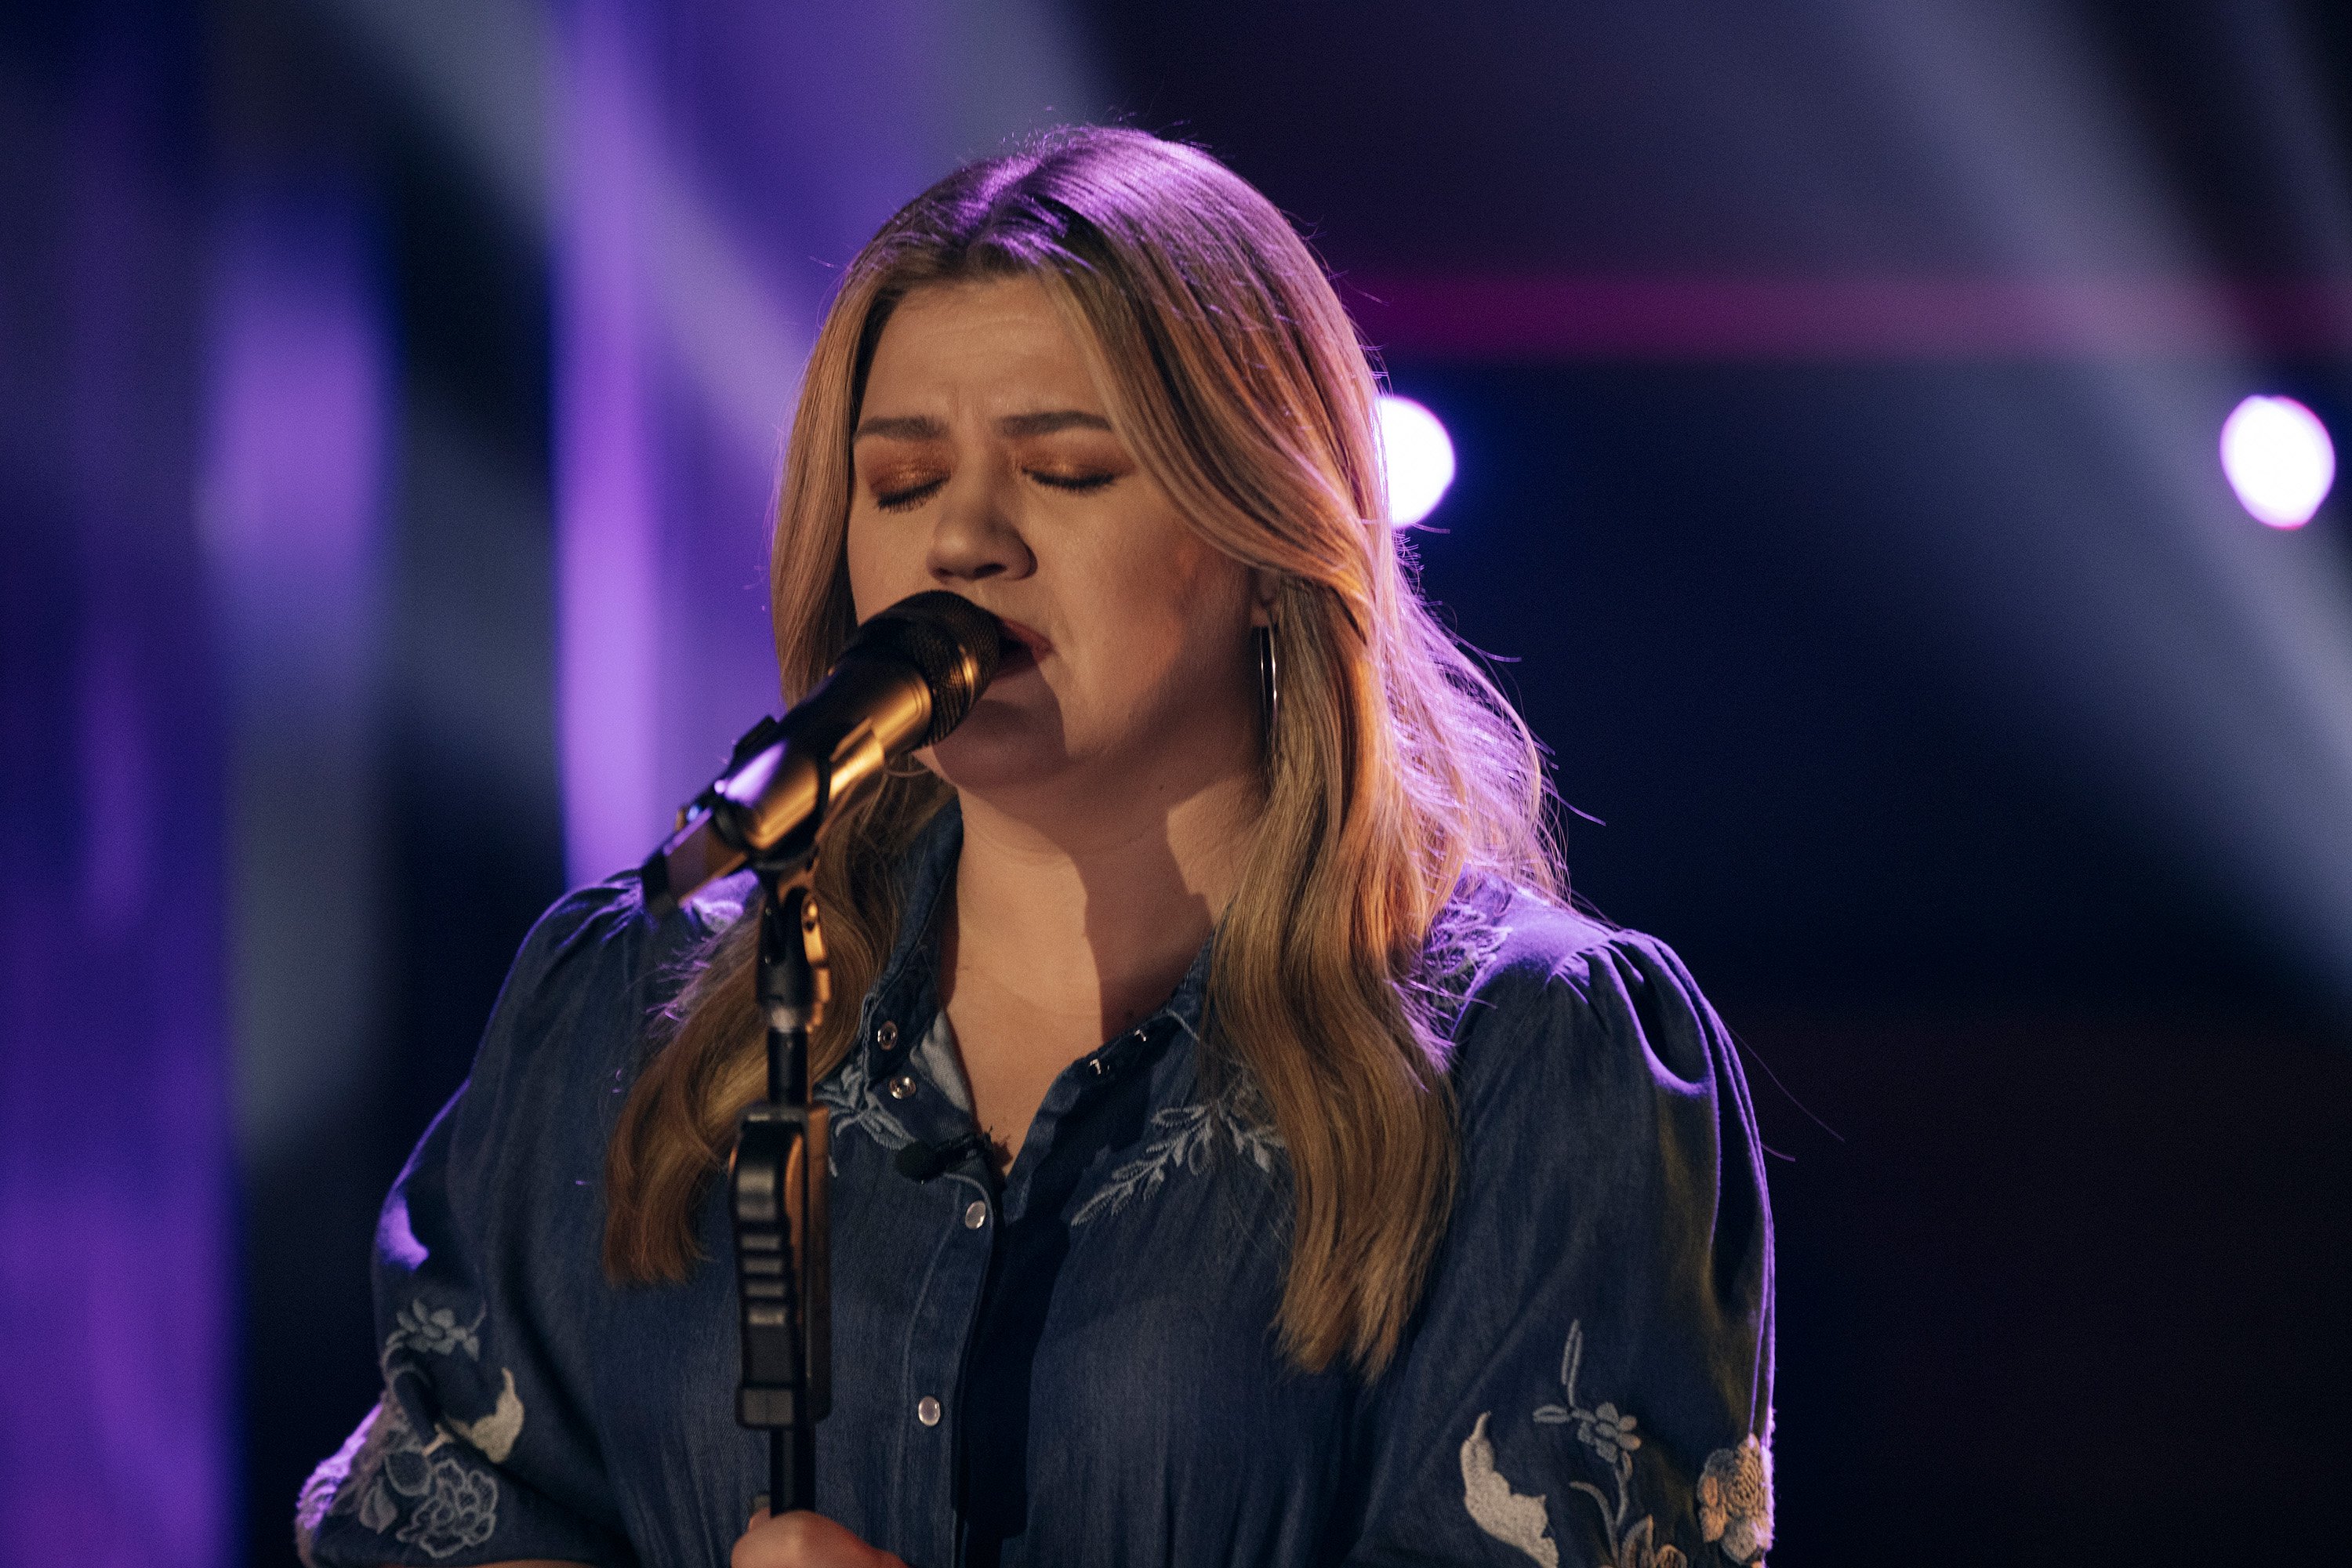     Kelly Clarkson in Season 3 of "The Kelly Clarkson Show" on March 22, 2022. |  Source: Getty Images 